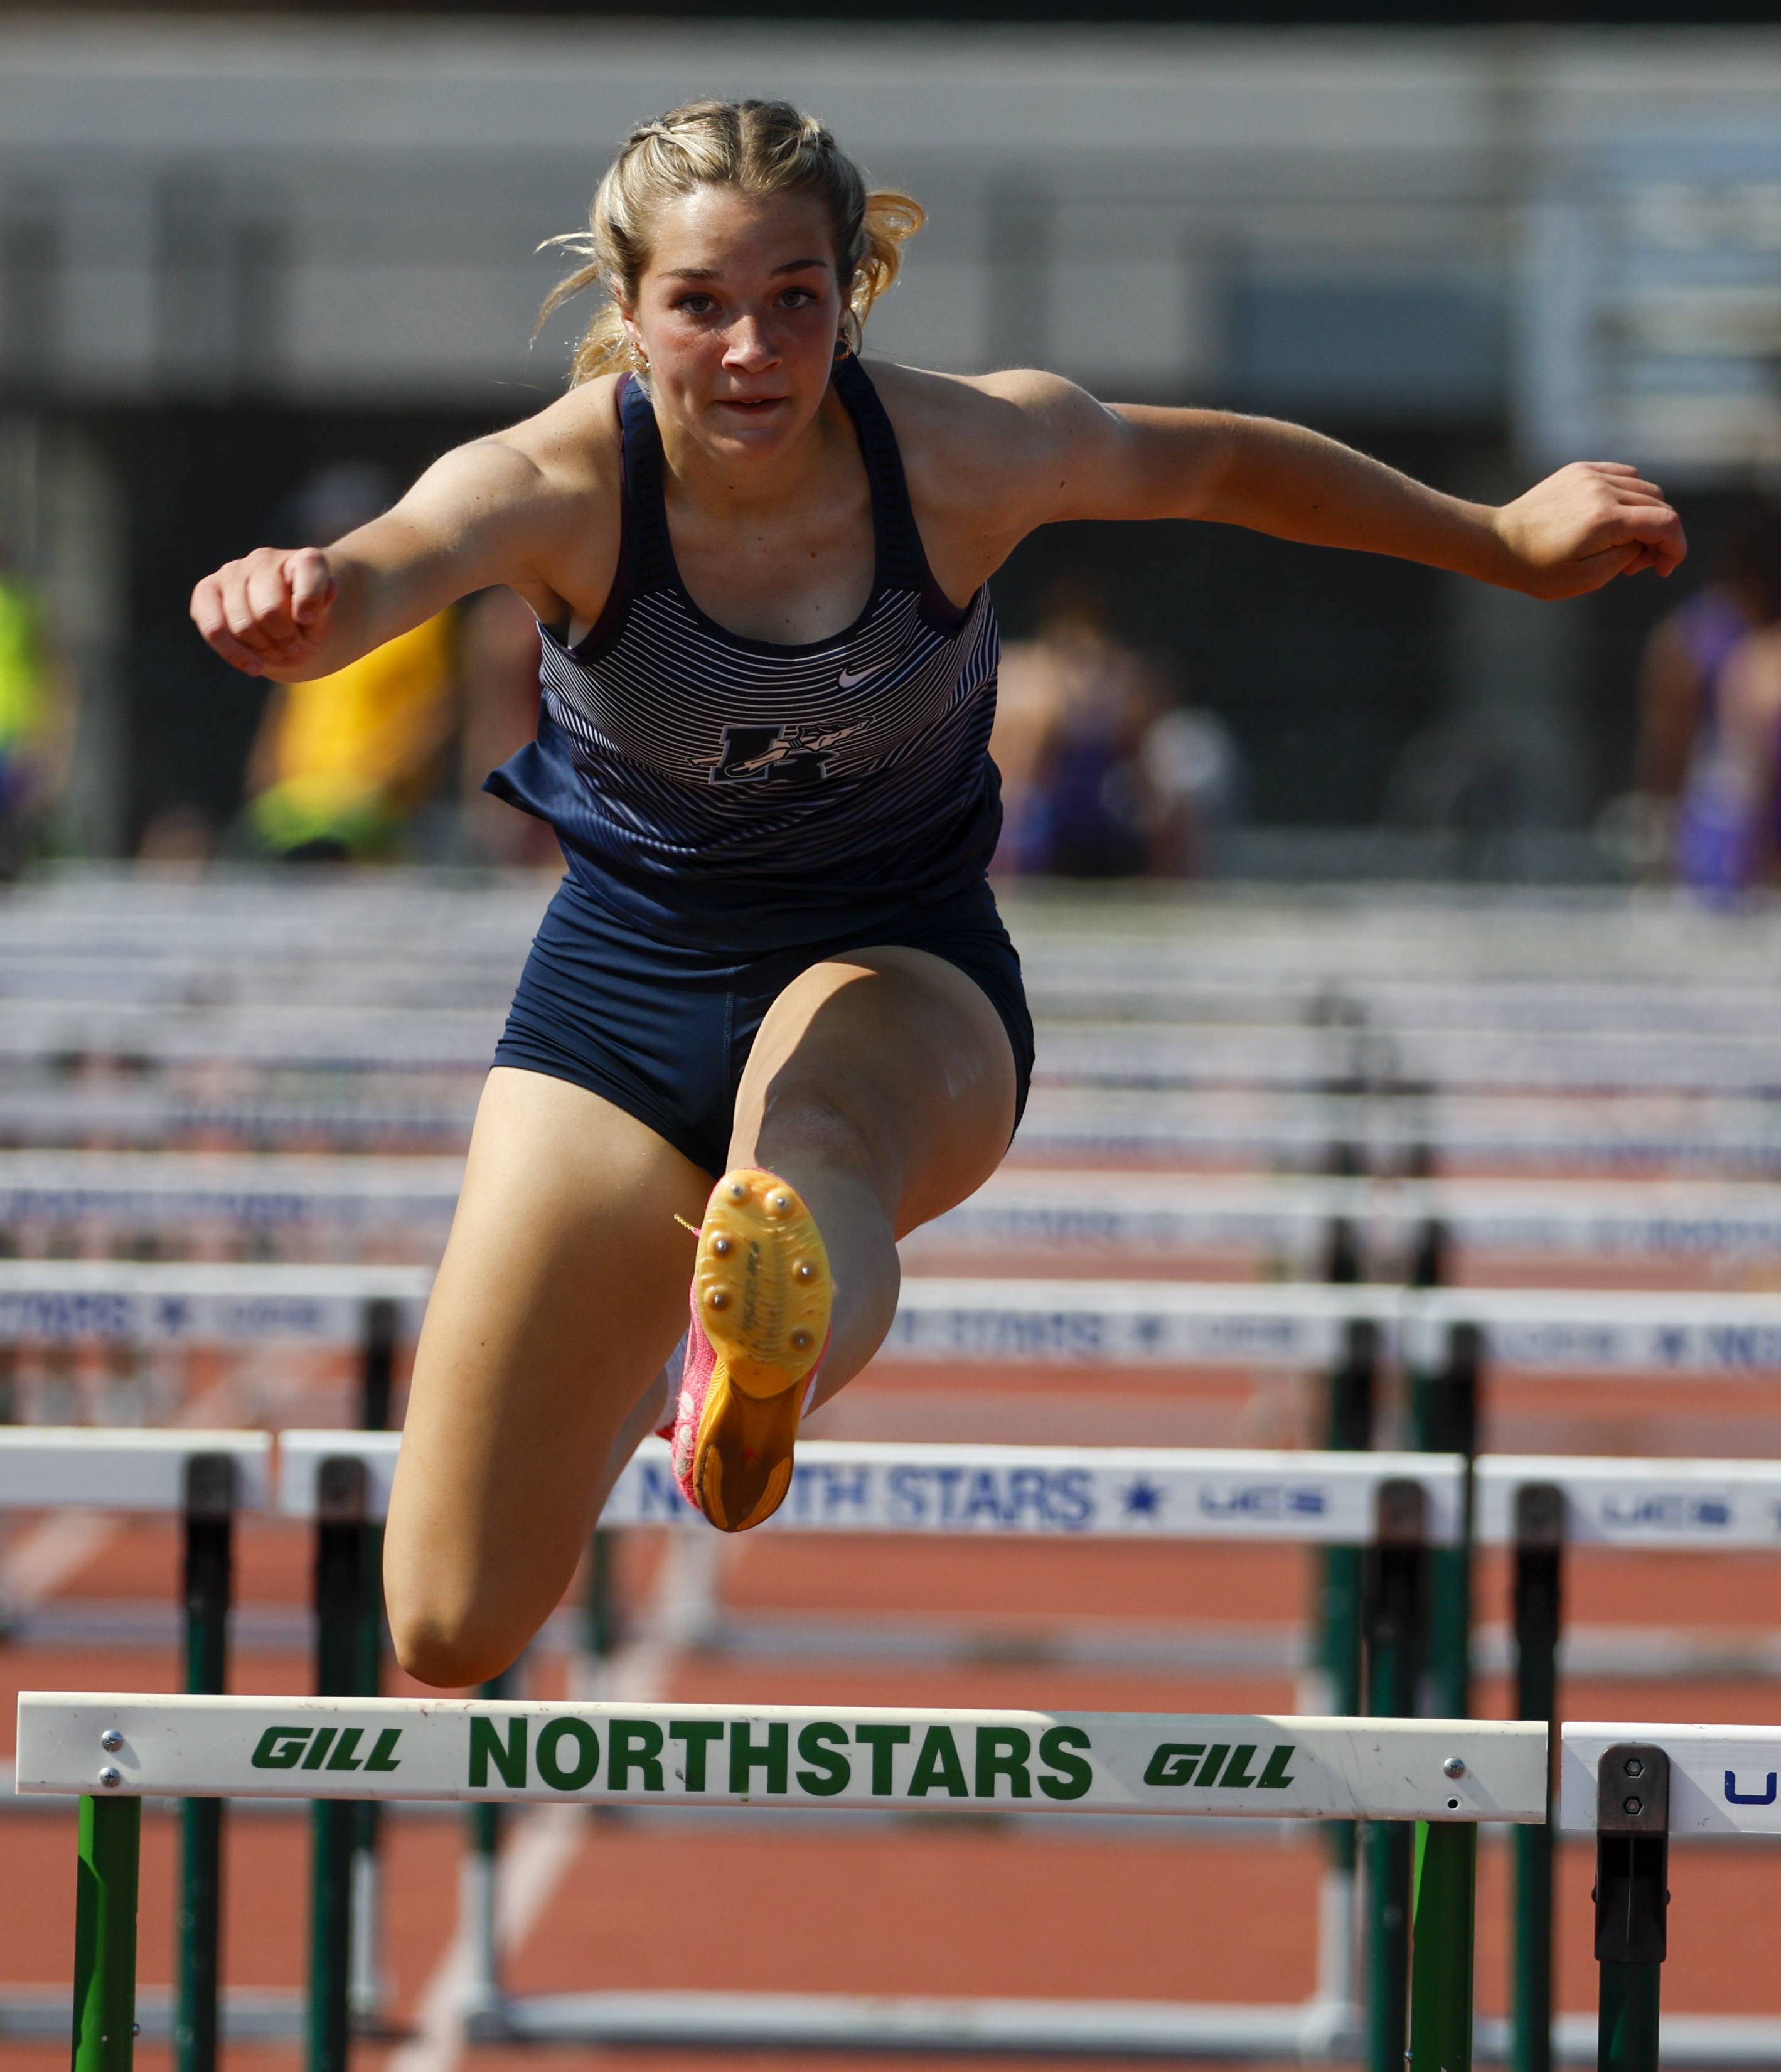 The boys and girls Section III track & field qualifier at Cicero-North Syracuse High School Thursday, June 1, 2023. N. Scott Trimble | strimble@syracuse.com